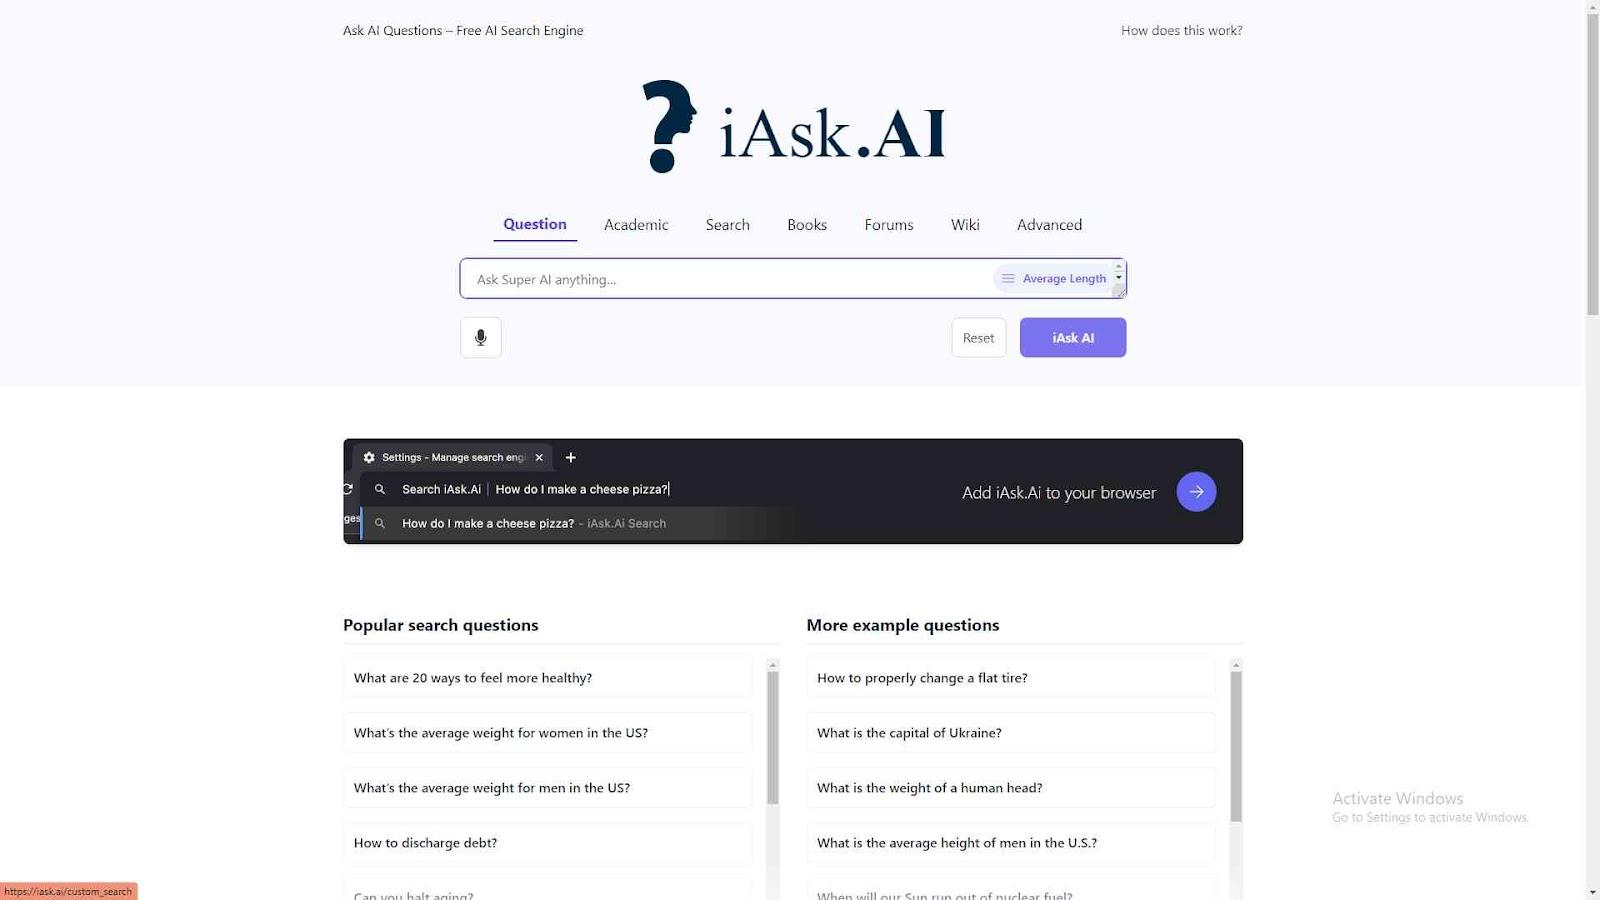 Chat AI - Ask Anything